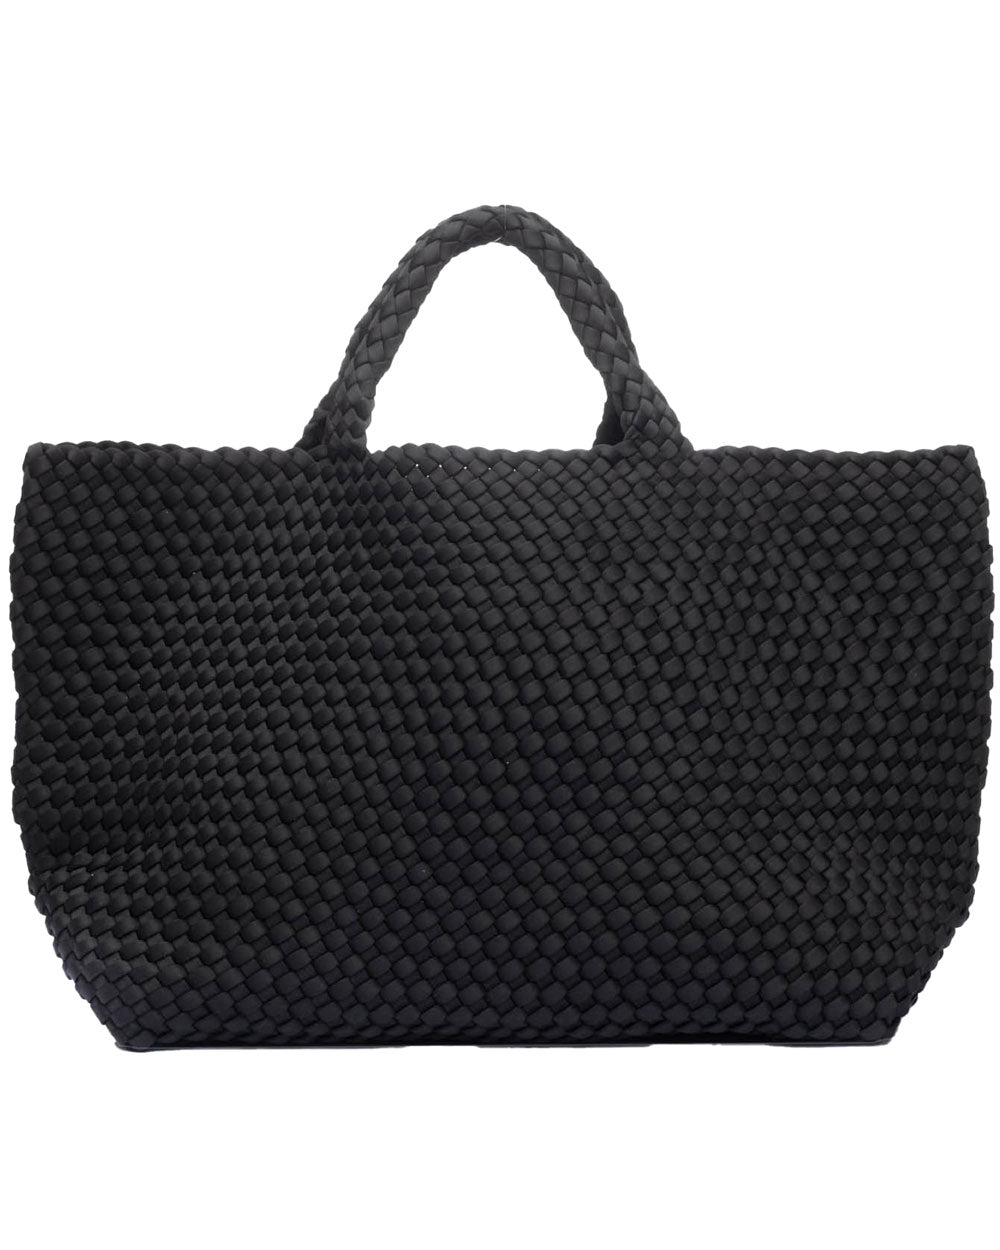 St. Barths Large Tote in Onyx